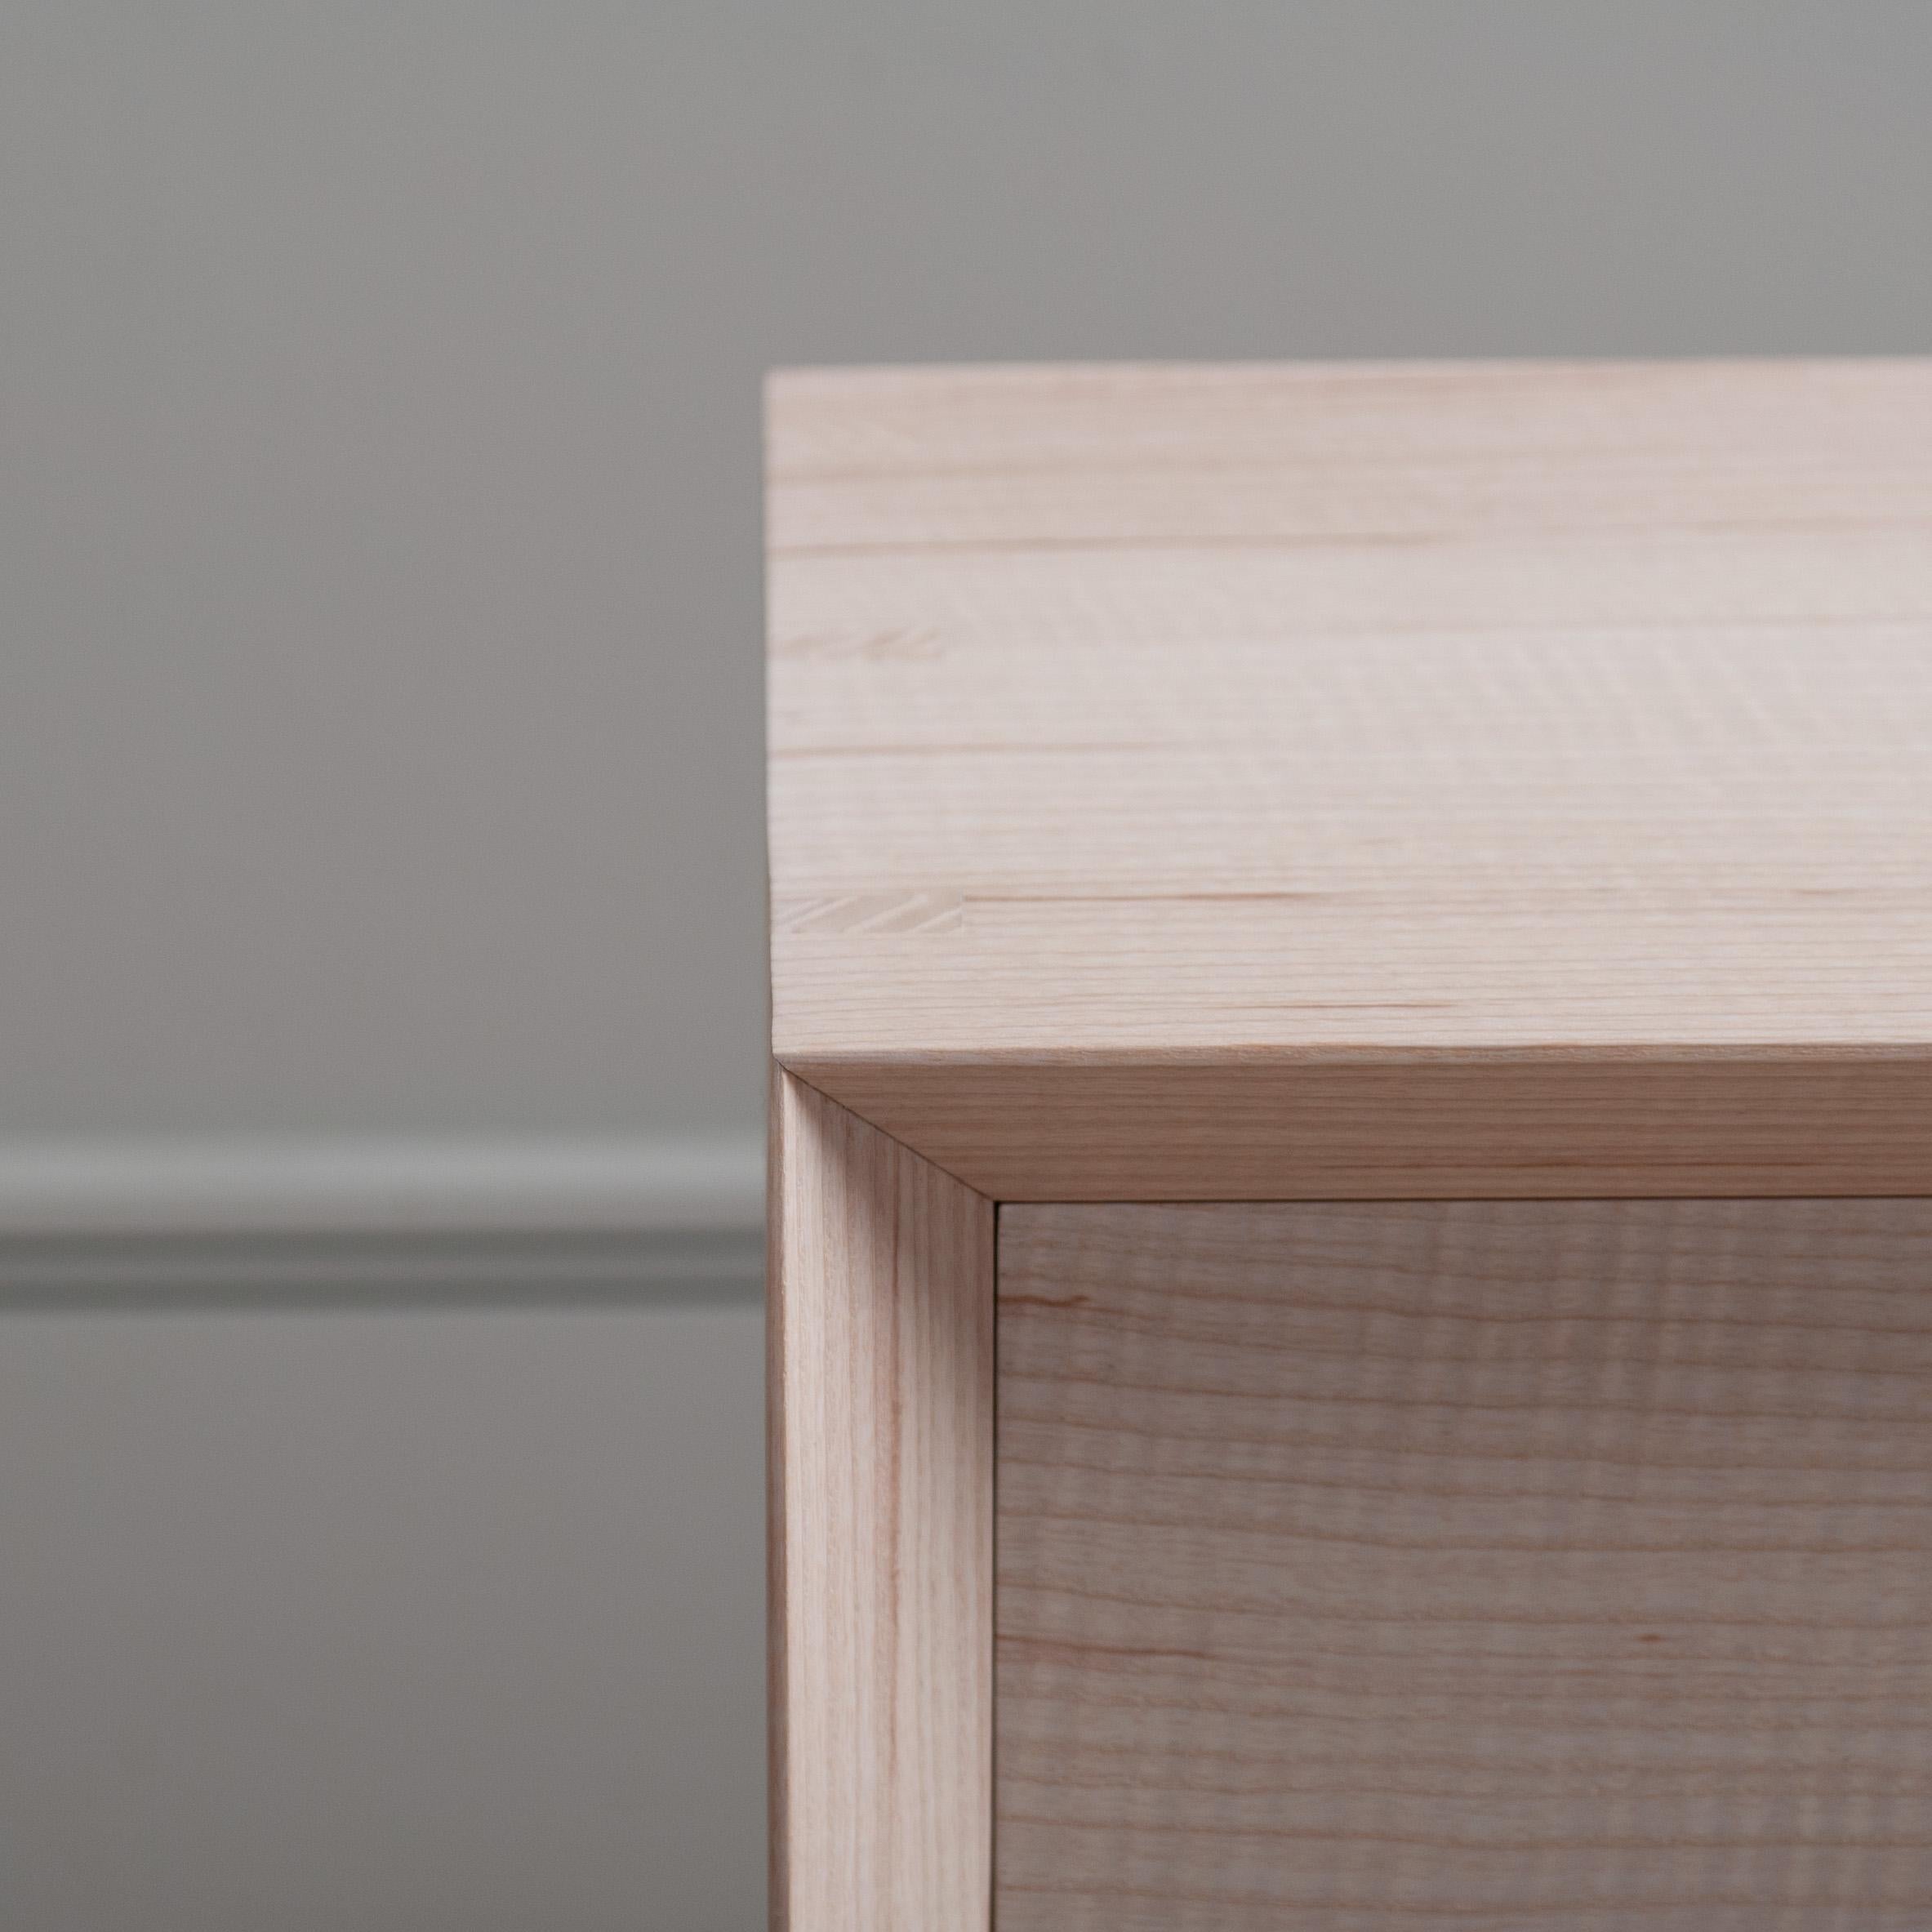 Paar Handcrafted English Ash End Tables / Drawers. (Asche) im Angebot